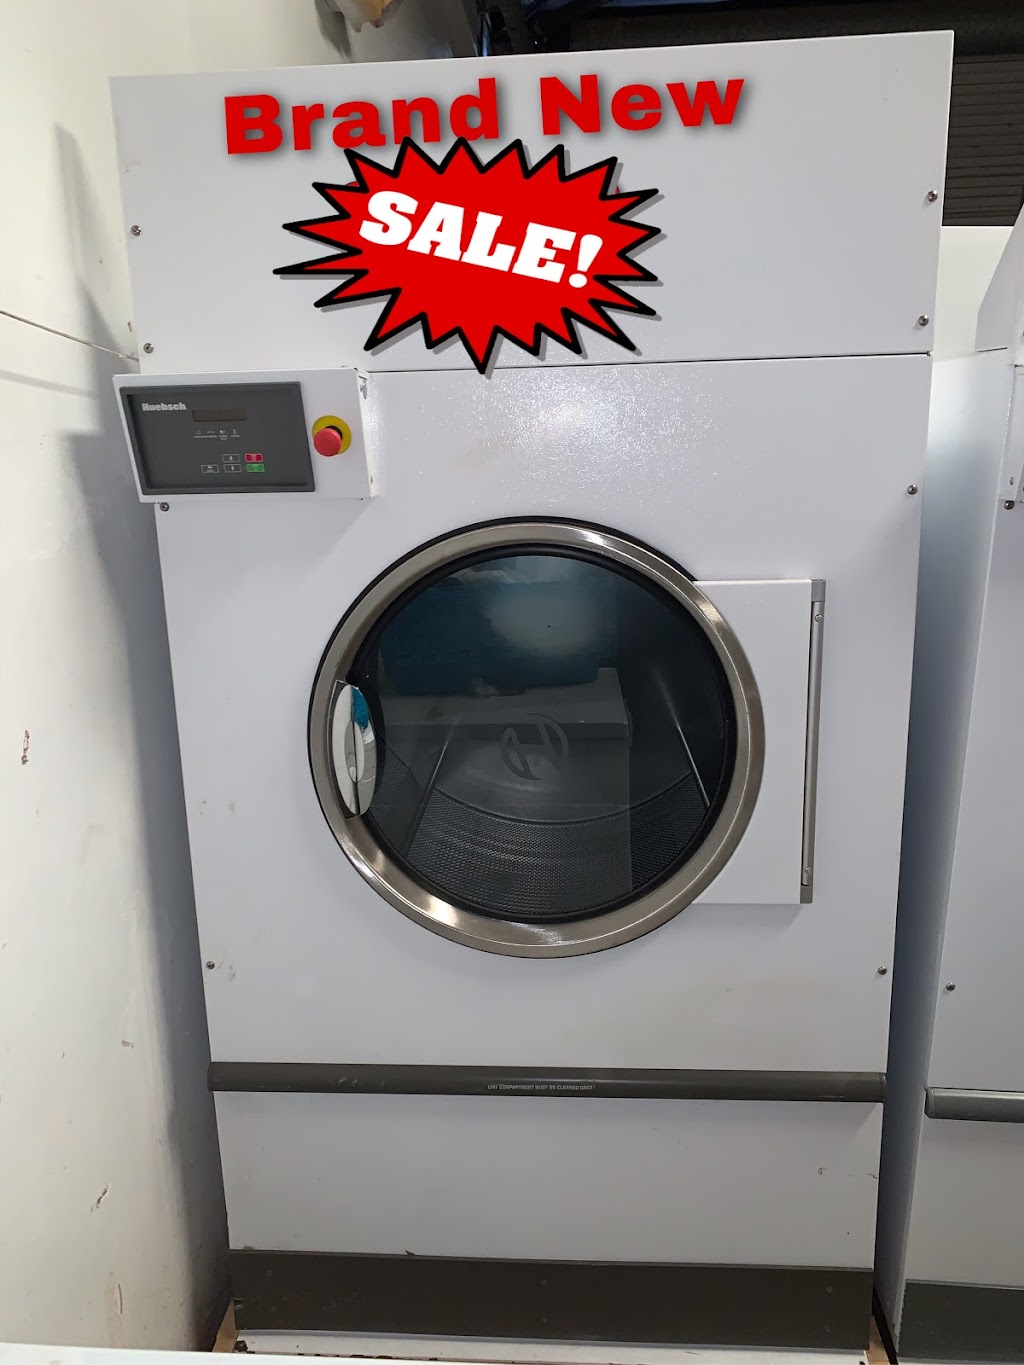 24hr Commercial Laundry service repair | 412 N Pine Hill, Rd suit EF, Orlando, FL 32811 | Phone: (407) 600-6828